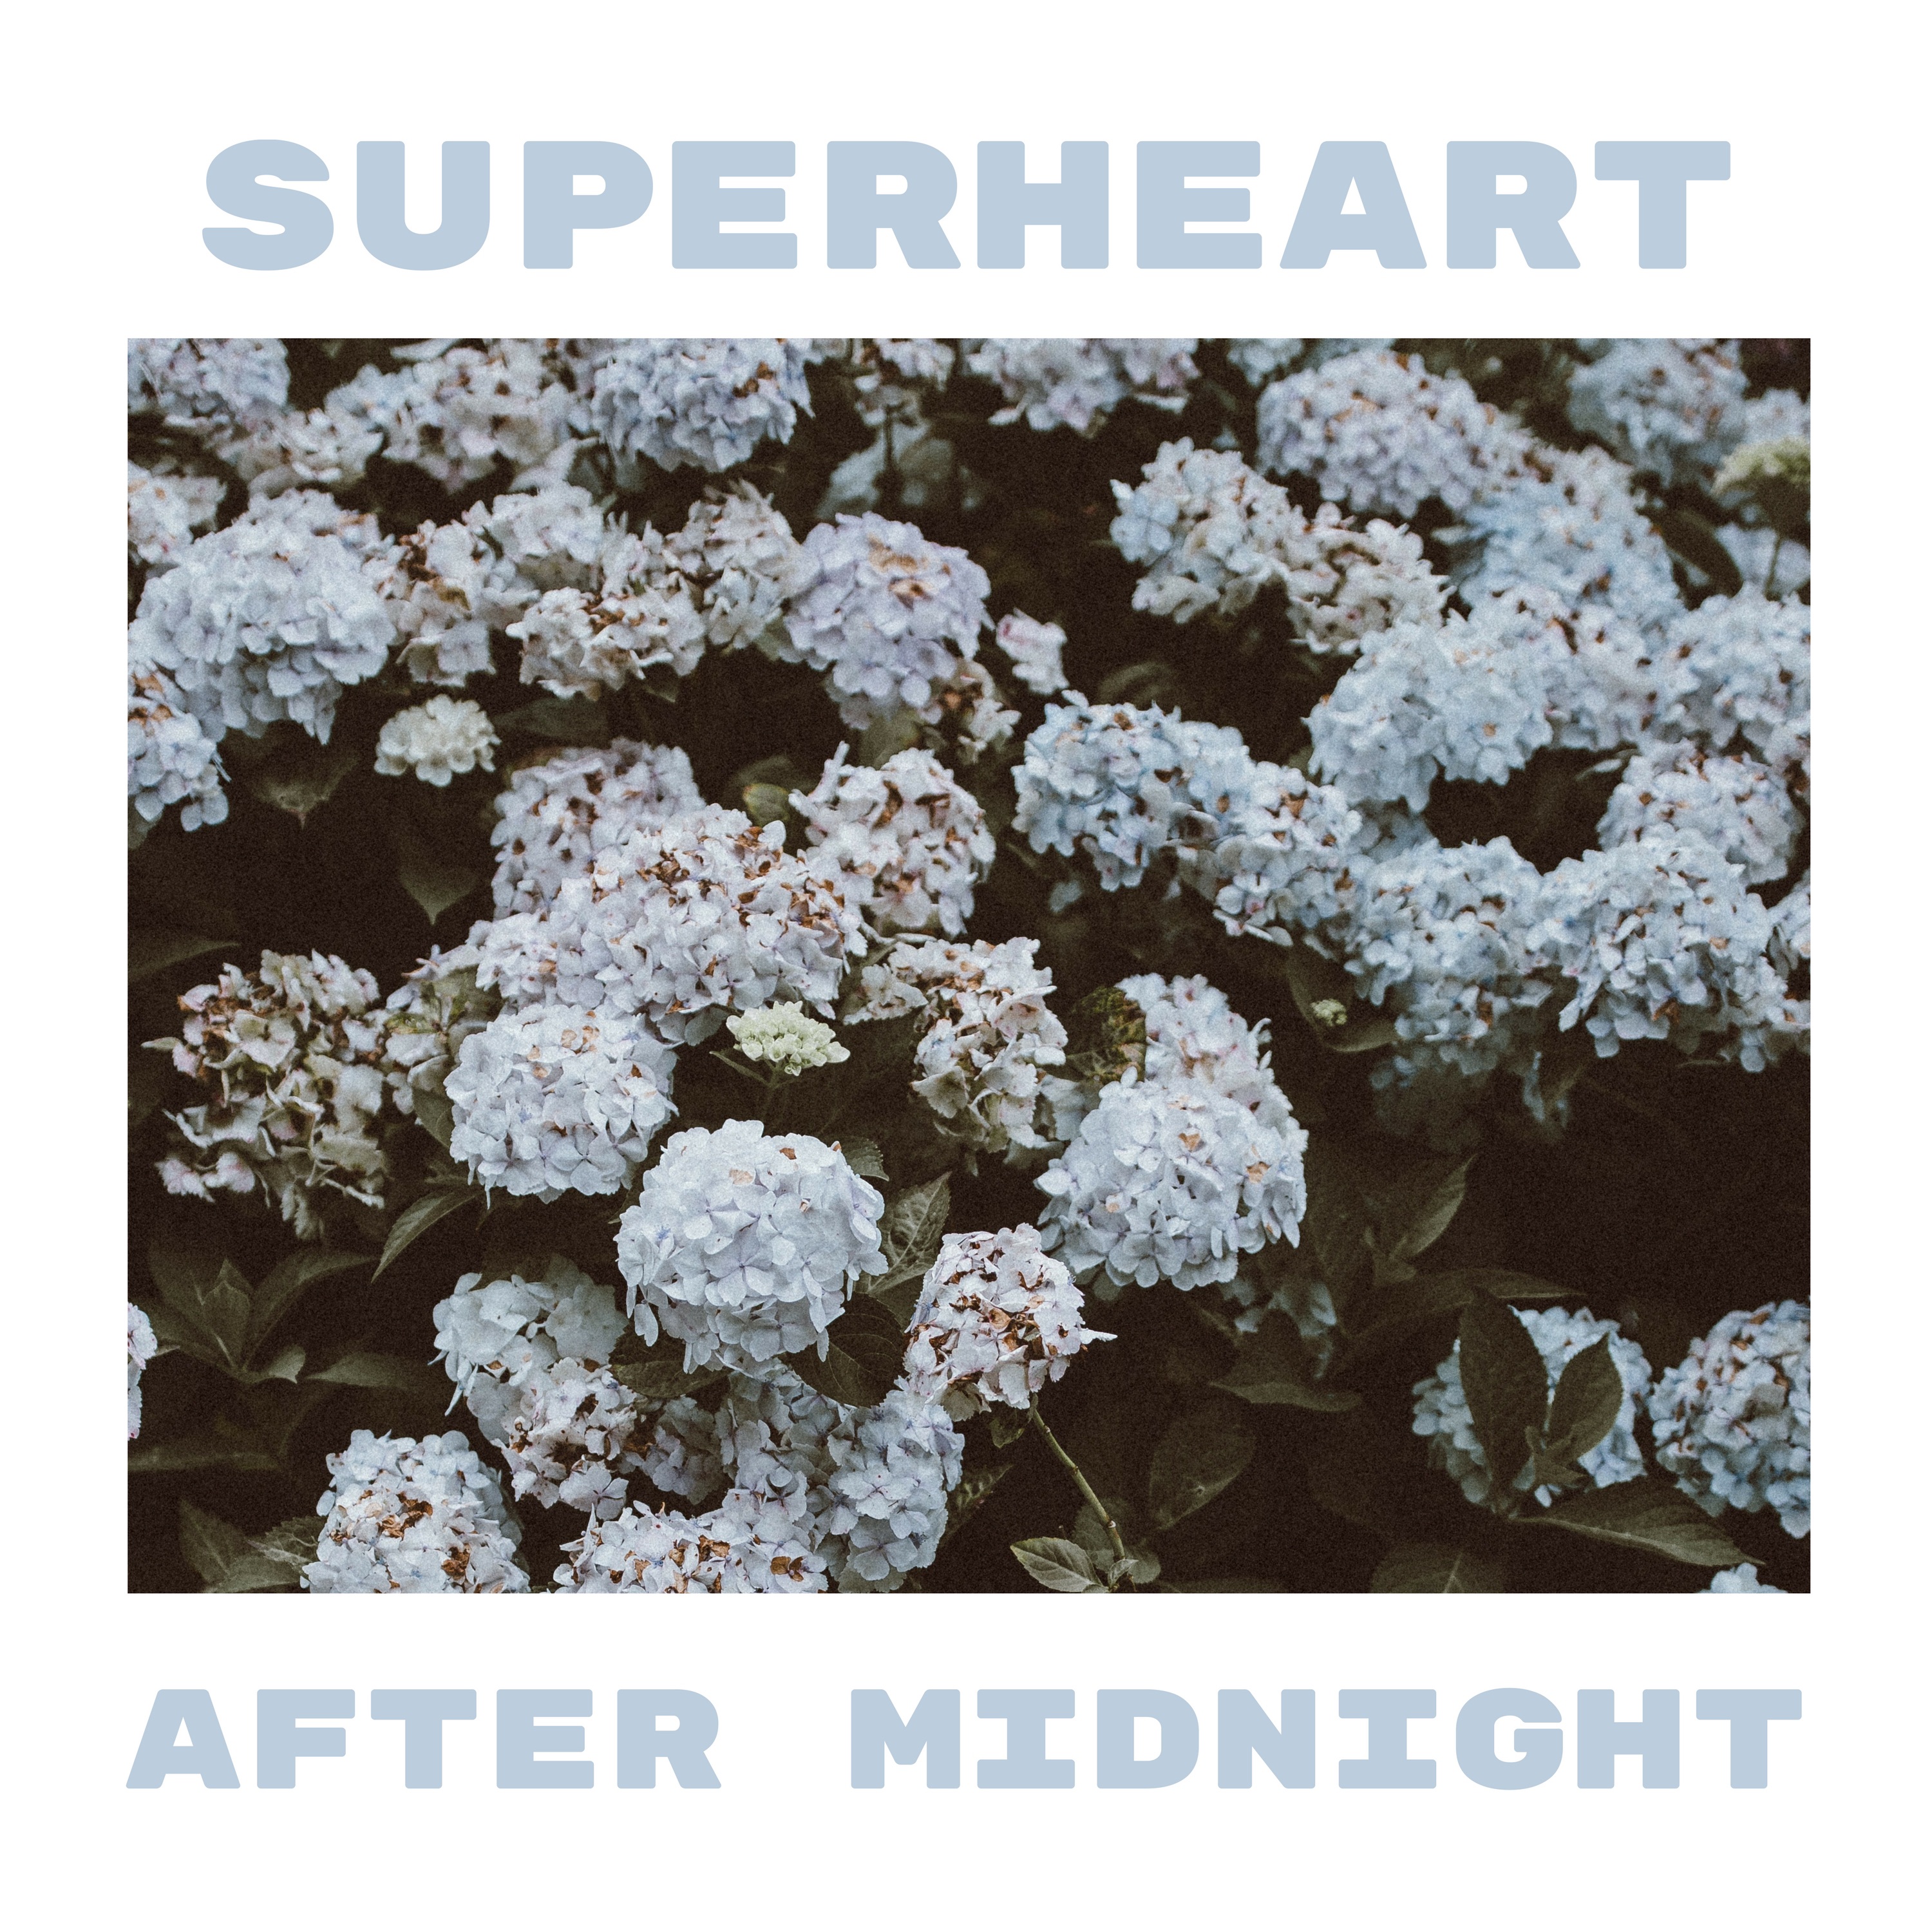 New: Superheart – After Midnight